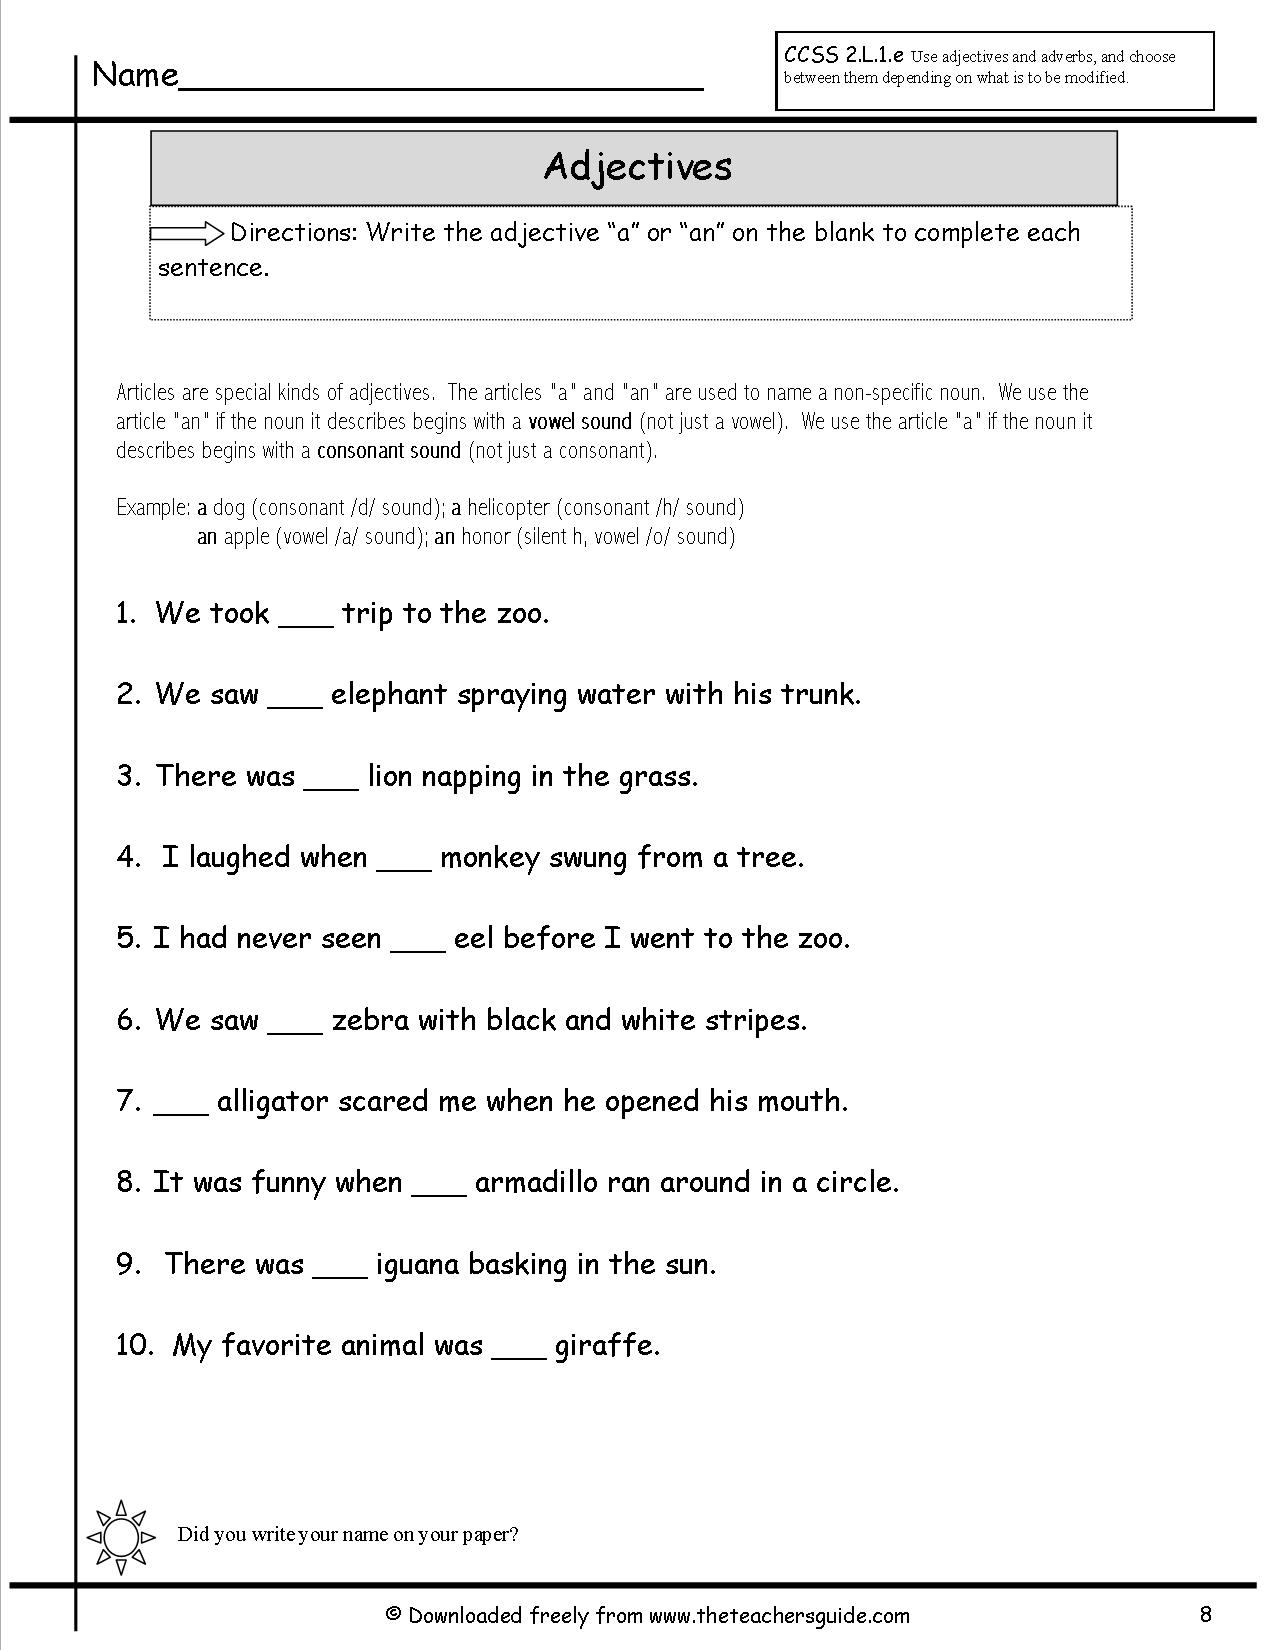 15-best-images-of-nouns-and-adjectives-worksheets-identifying-nouns-verbs-adjectives